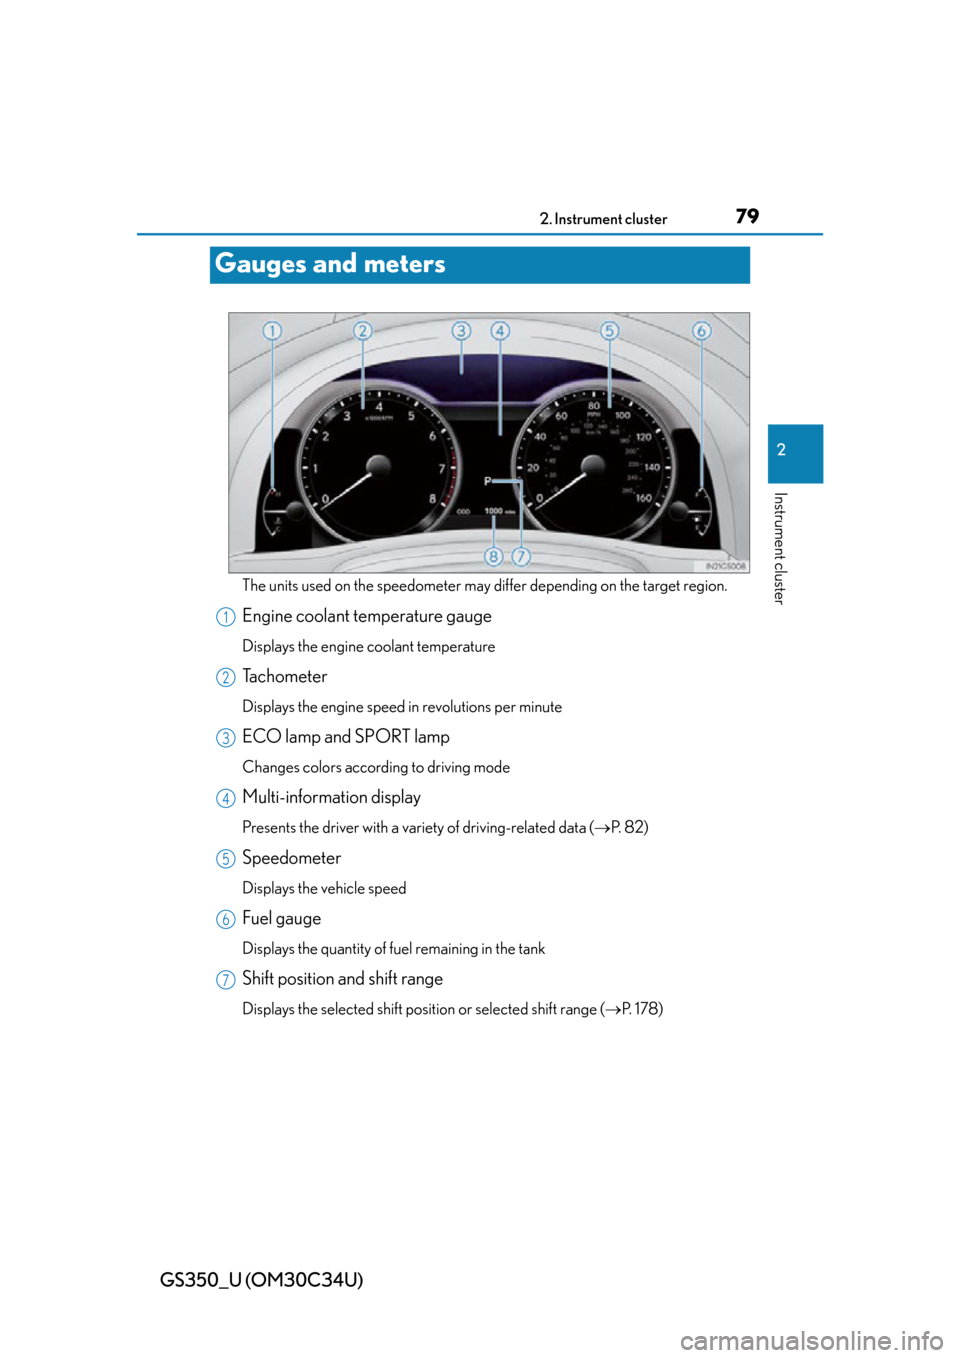 Lexus GS350 2013  Warranty and Services Guide / LEXUS 2013 GS350 OWNERS MANUAL (OM30C34U) 79
GS350_U (OM30C34U)2. Instrument cluster
2
Instrument cluster
Gauges and meters
The units used on the speedometer may di ffer depending on the target region.
Engine coolant temperature gauge
Display